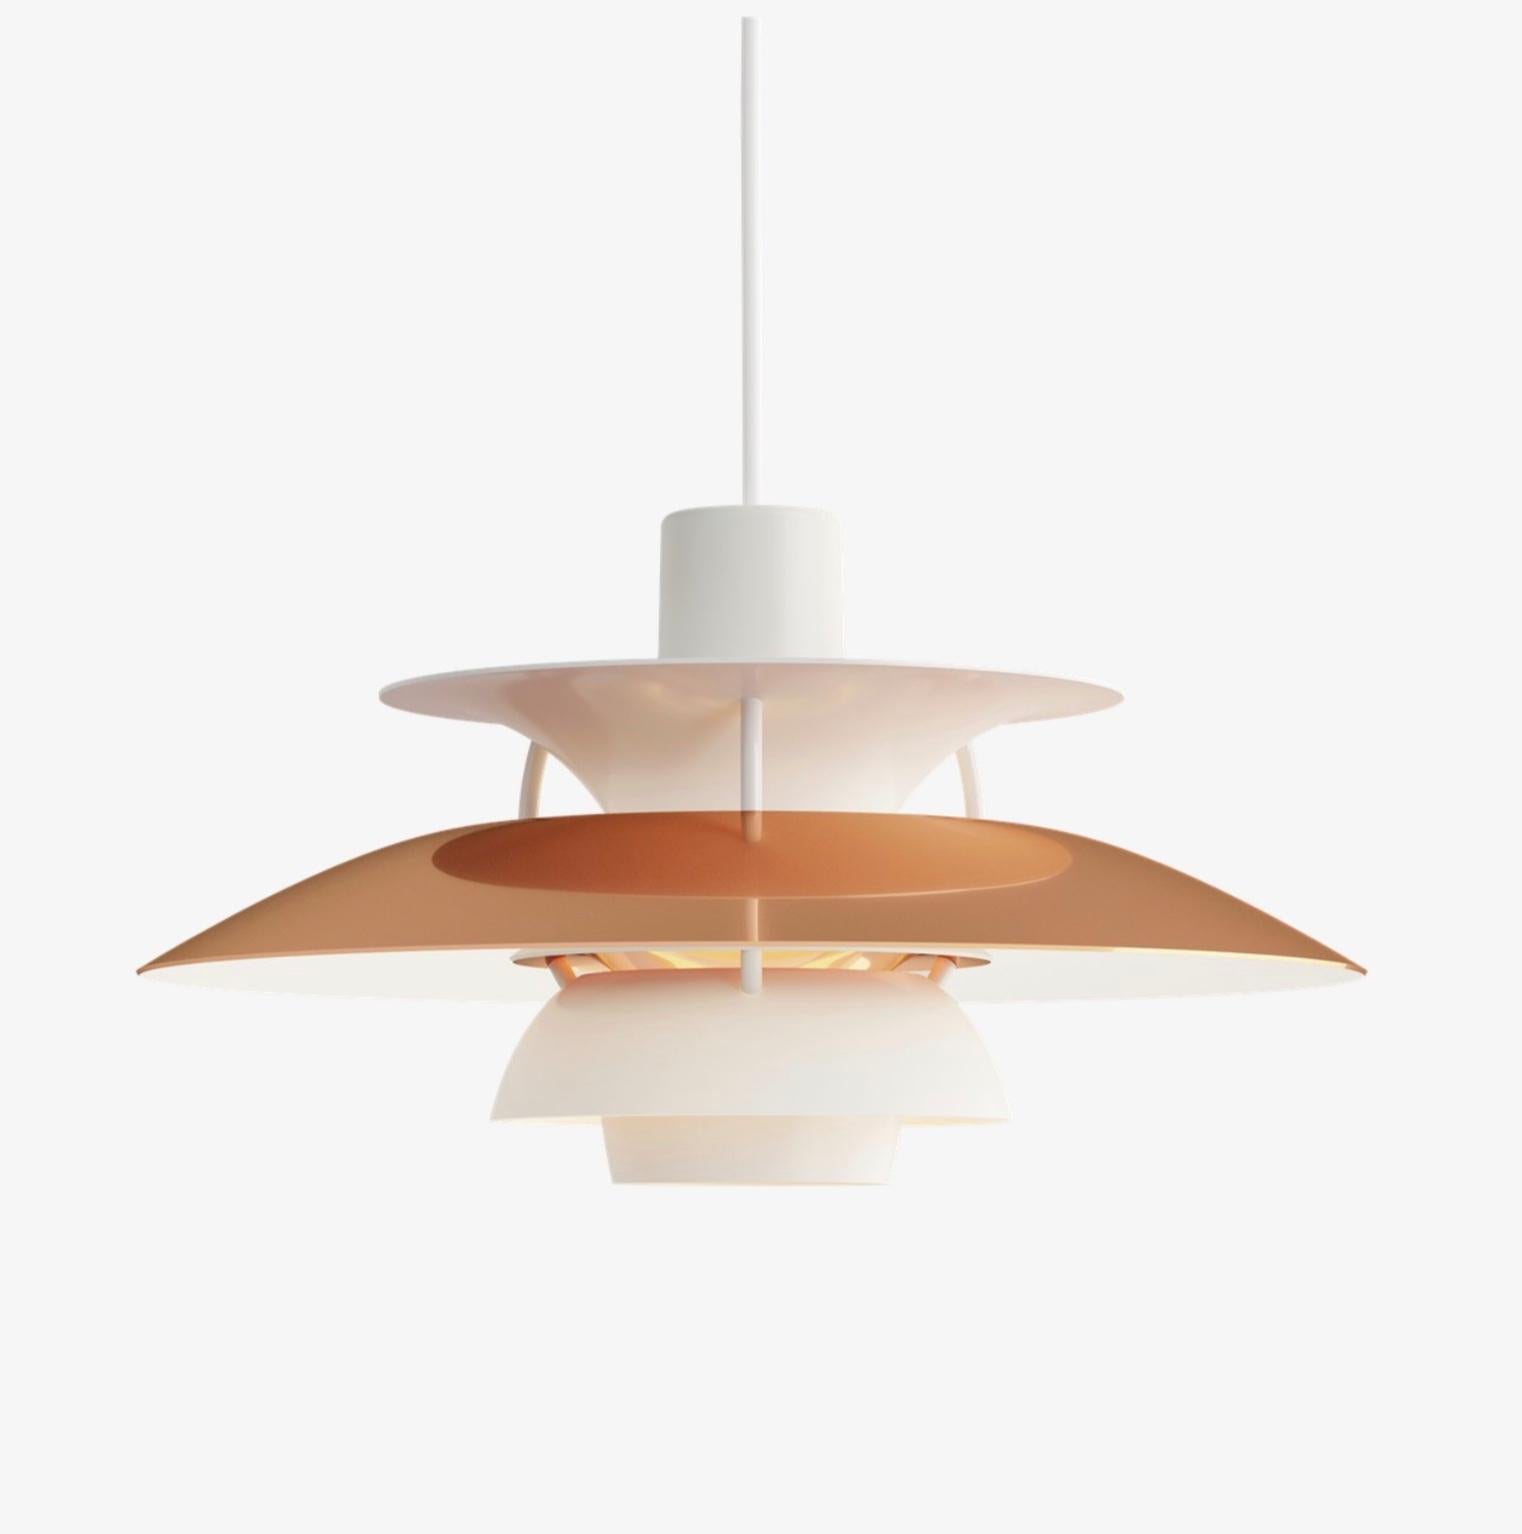 Poul Henningsen PH5 mini pendant for Louis Poulsen. Designed 1958, Mini in 2017. New, current production.

Poul Henningsen developed the PH 5 in 1958 in response to constant changes made to the shape and Size of incandescent bulbs by bulb